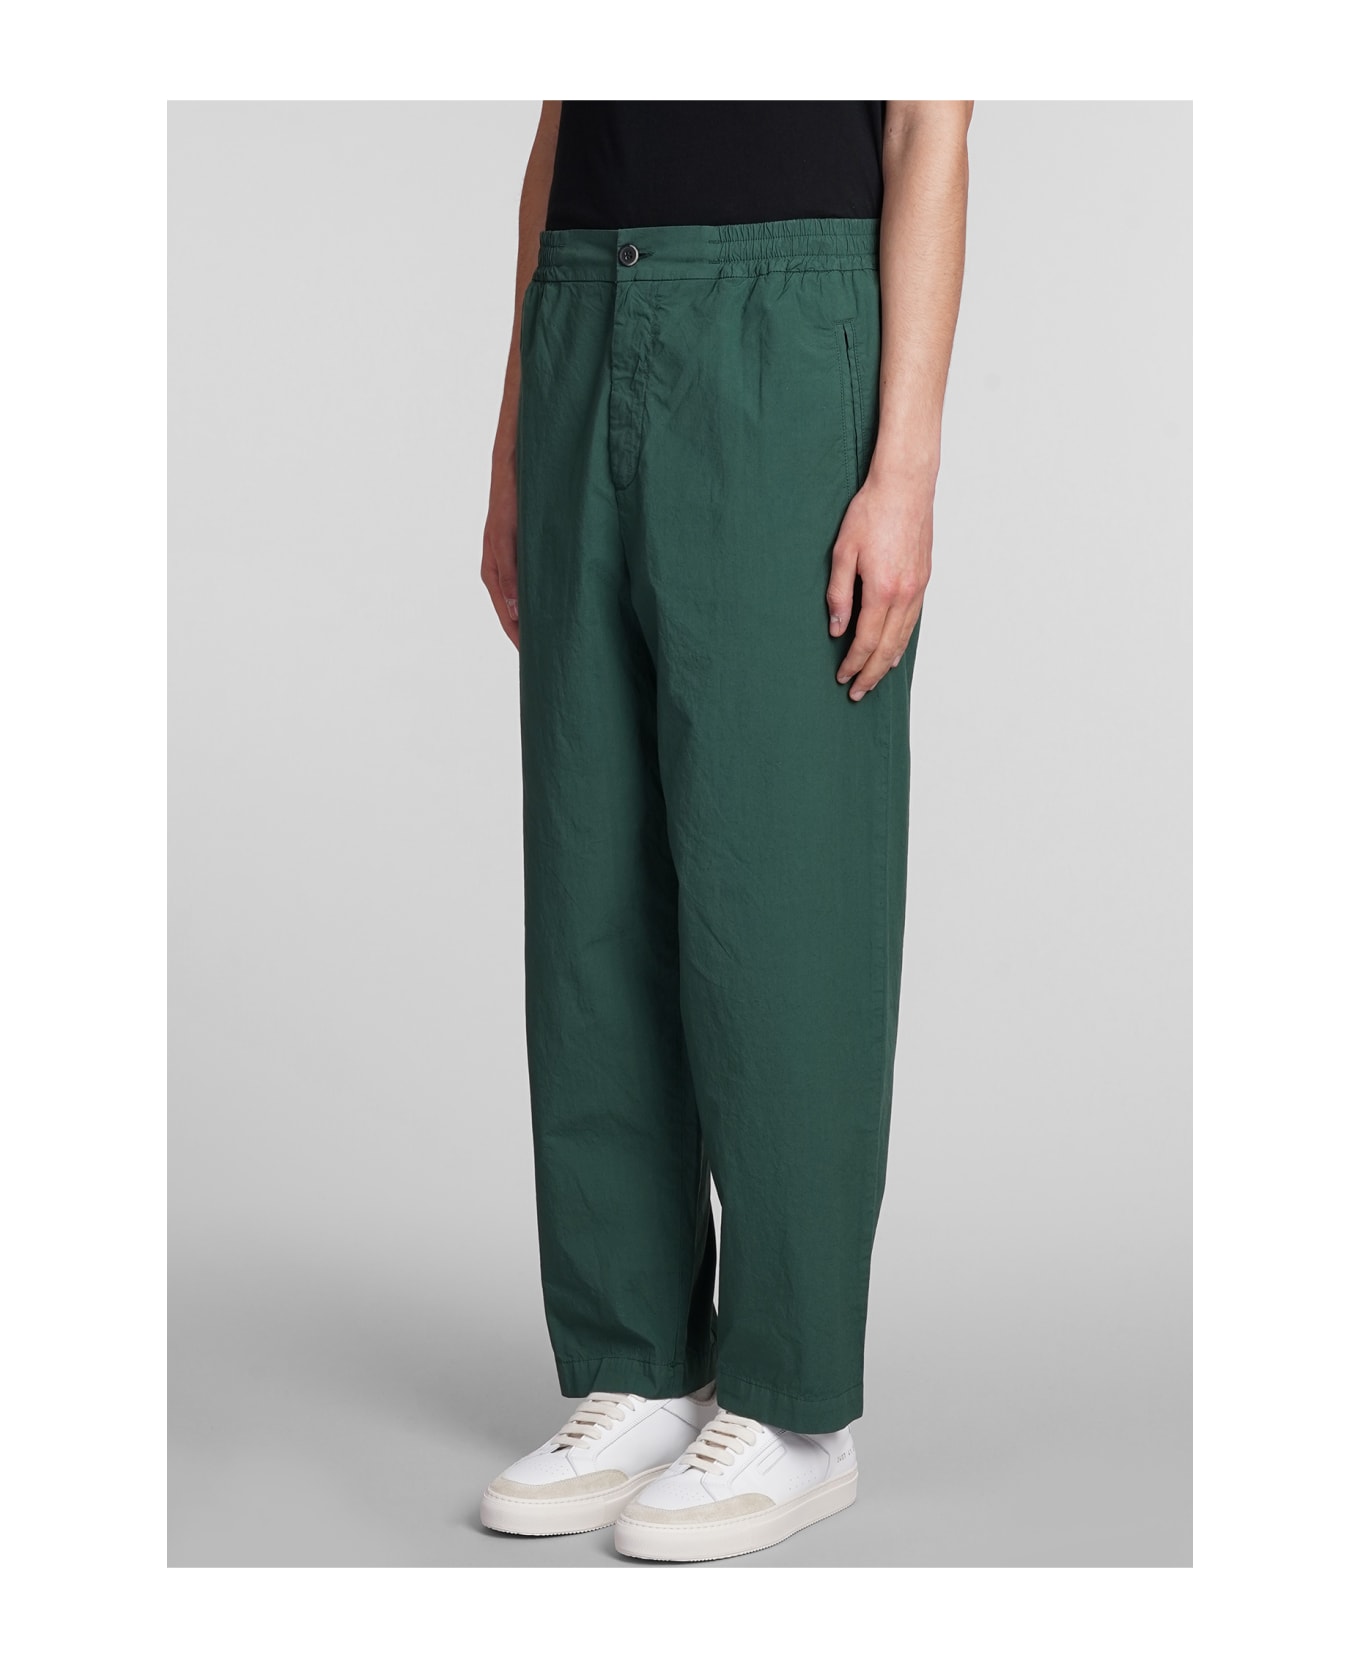 Barena Ameo Pants In Green Cotton - green